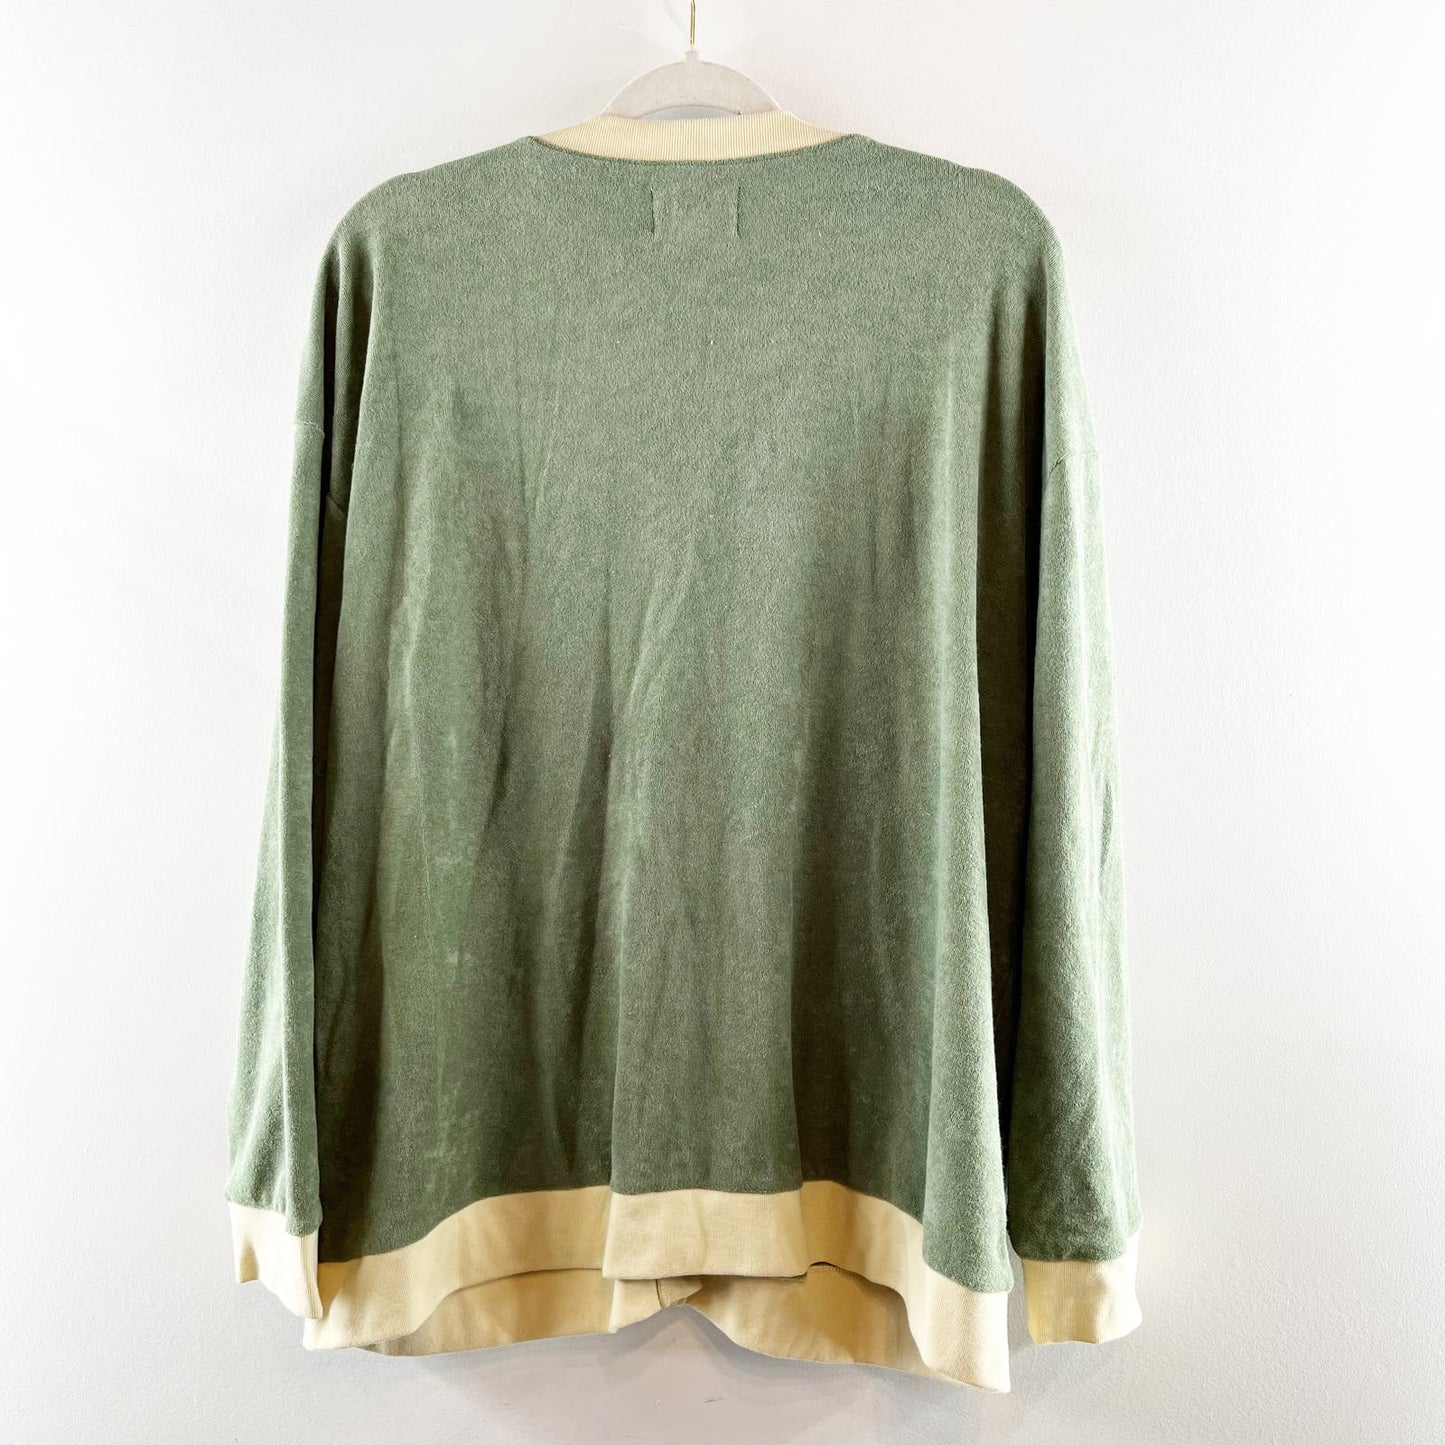 Madewell Towel Terry Button Up Cardigan Sweater Colorblock Green Yellow XL